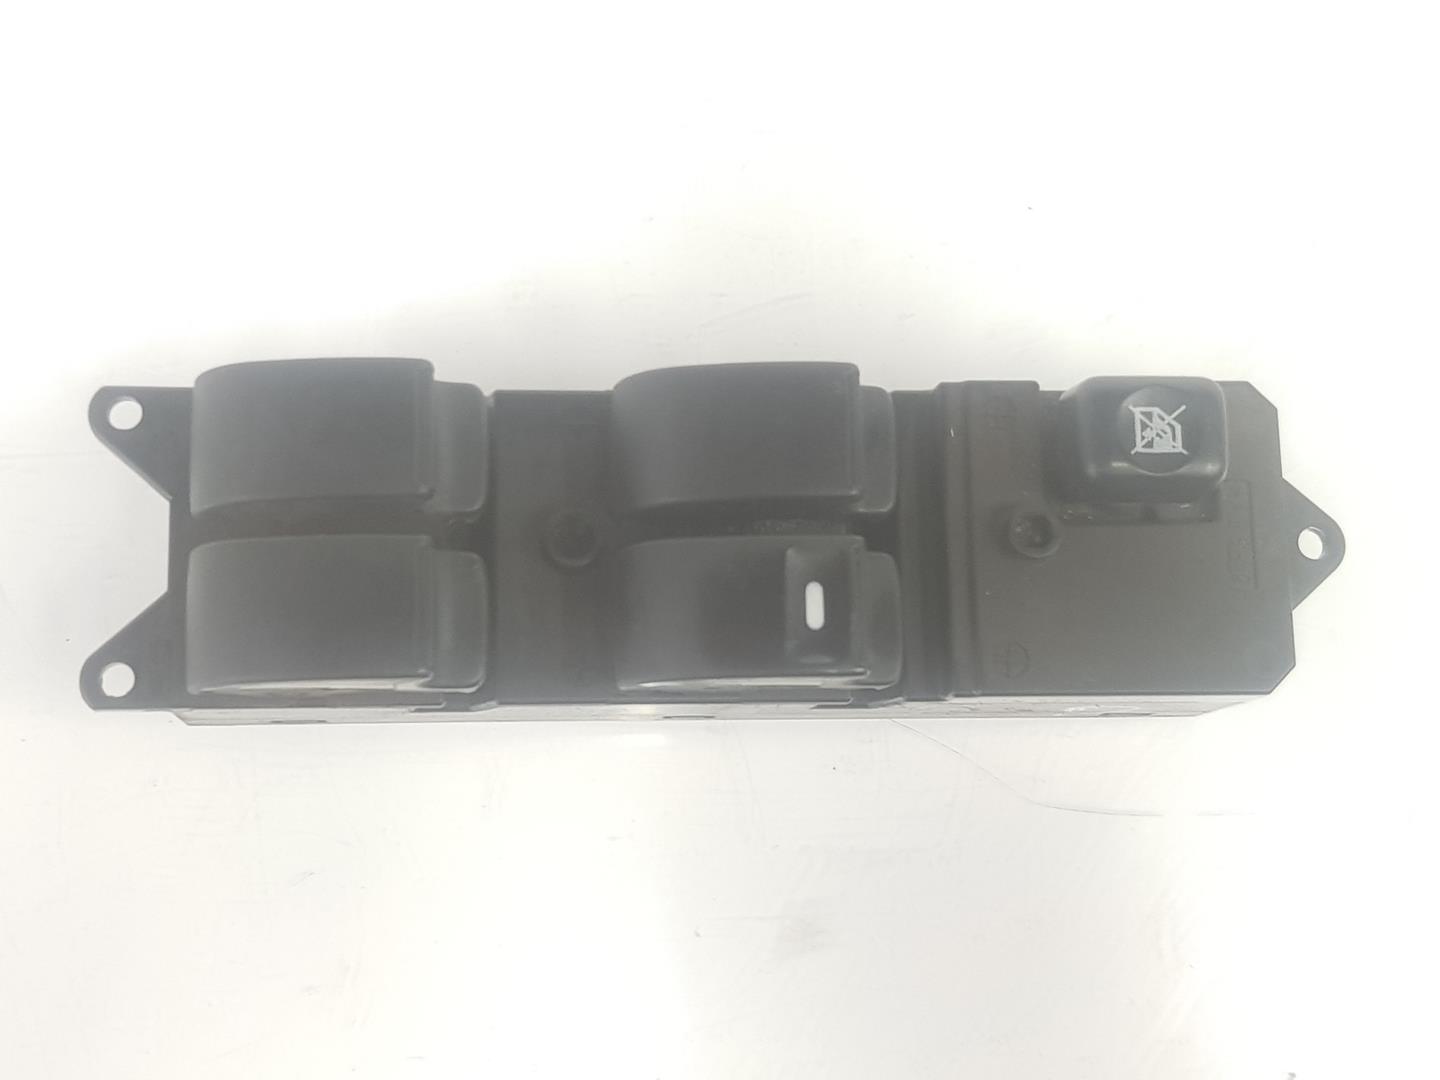 MITSUBISHI Pajero 3 generation (1999-2006) Front Right Door Window Switch 8608A001, 8608A001 21012362